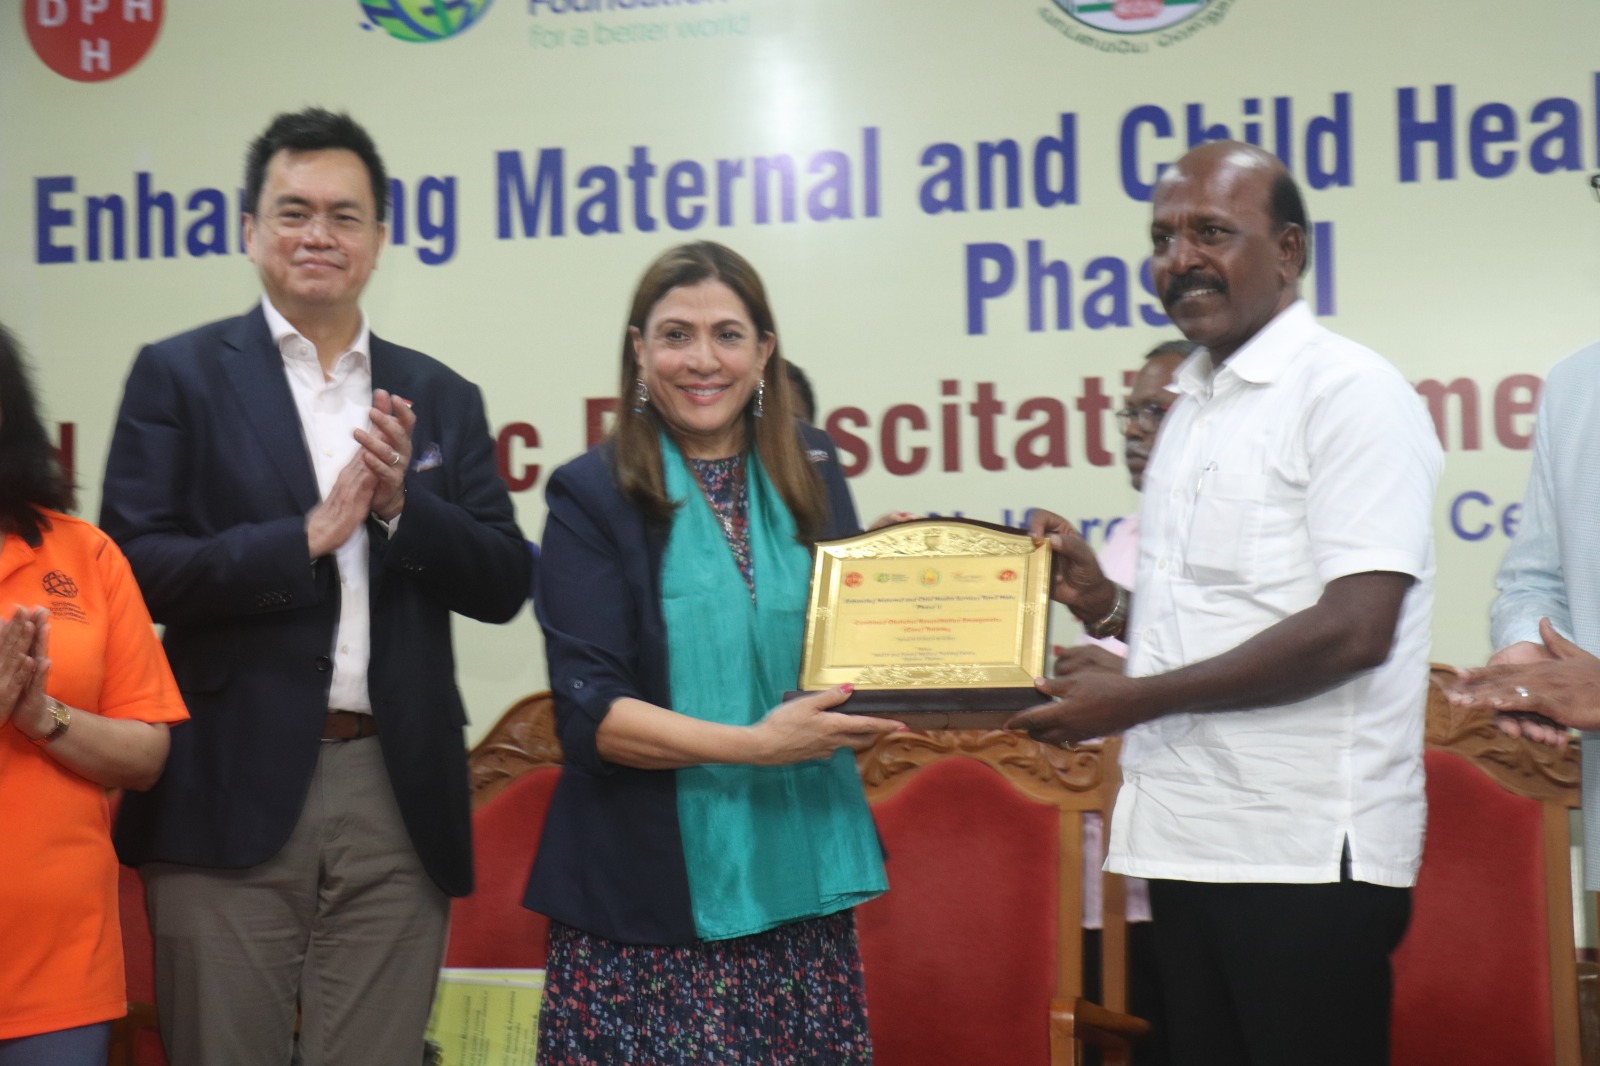 SINGHEALTH STRENGTHENS COMMITMENT TO MATERNAL AND CHILD HEALTHCARE IN TAMIL NADU